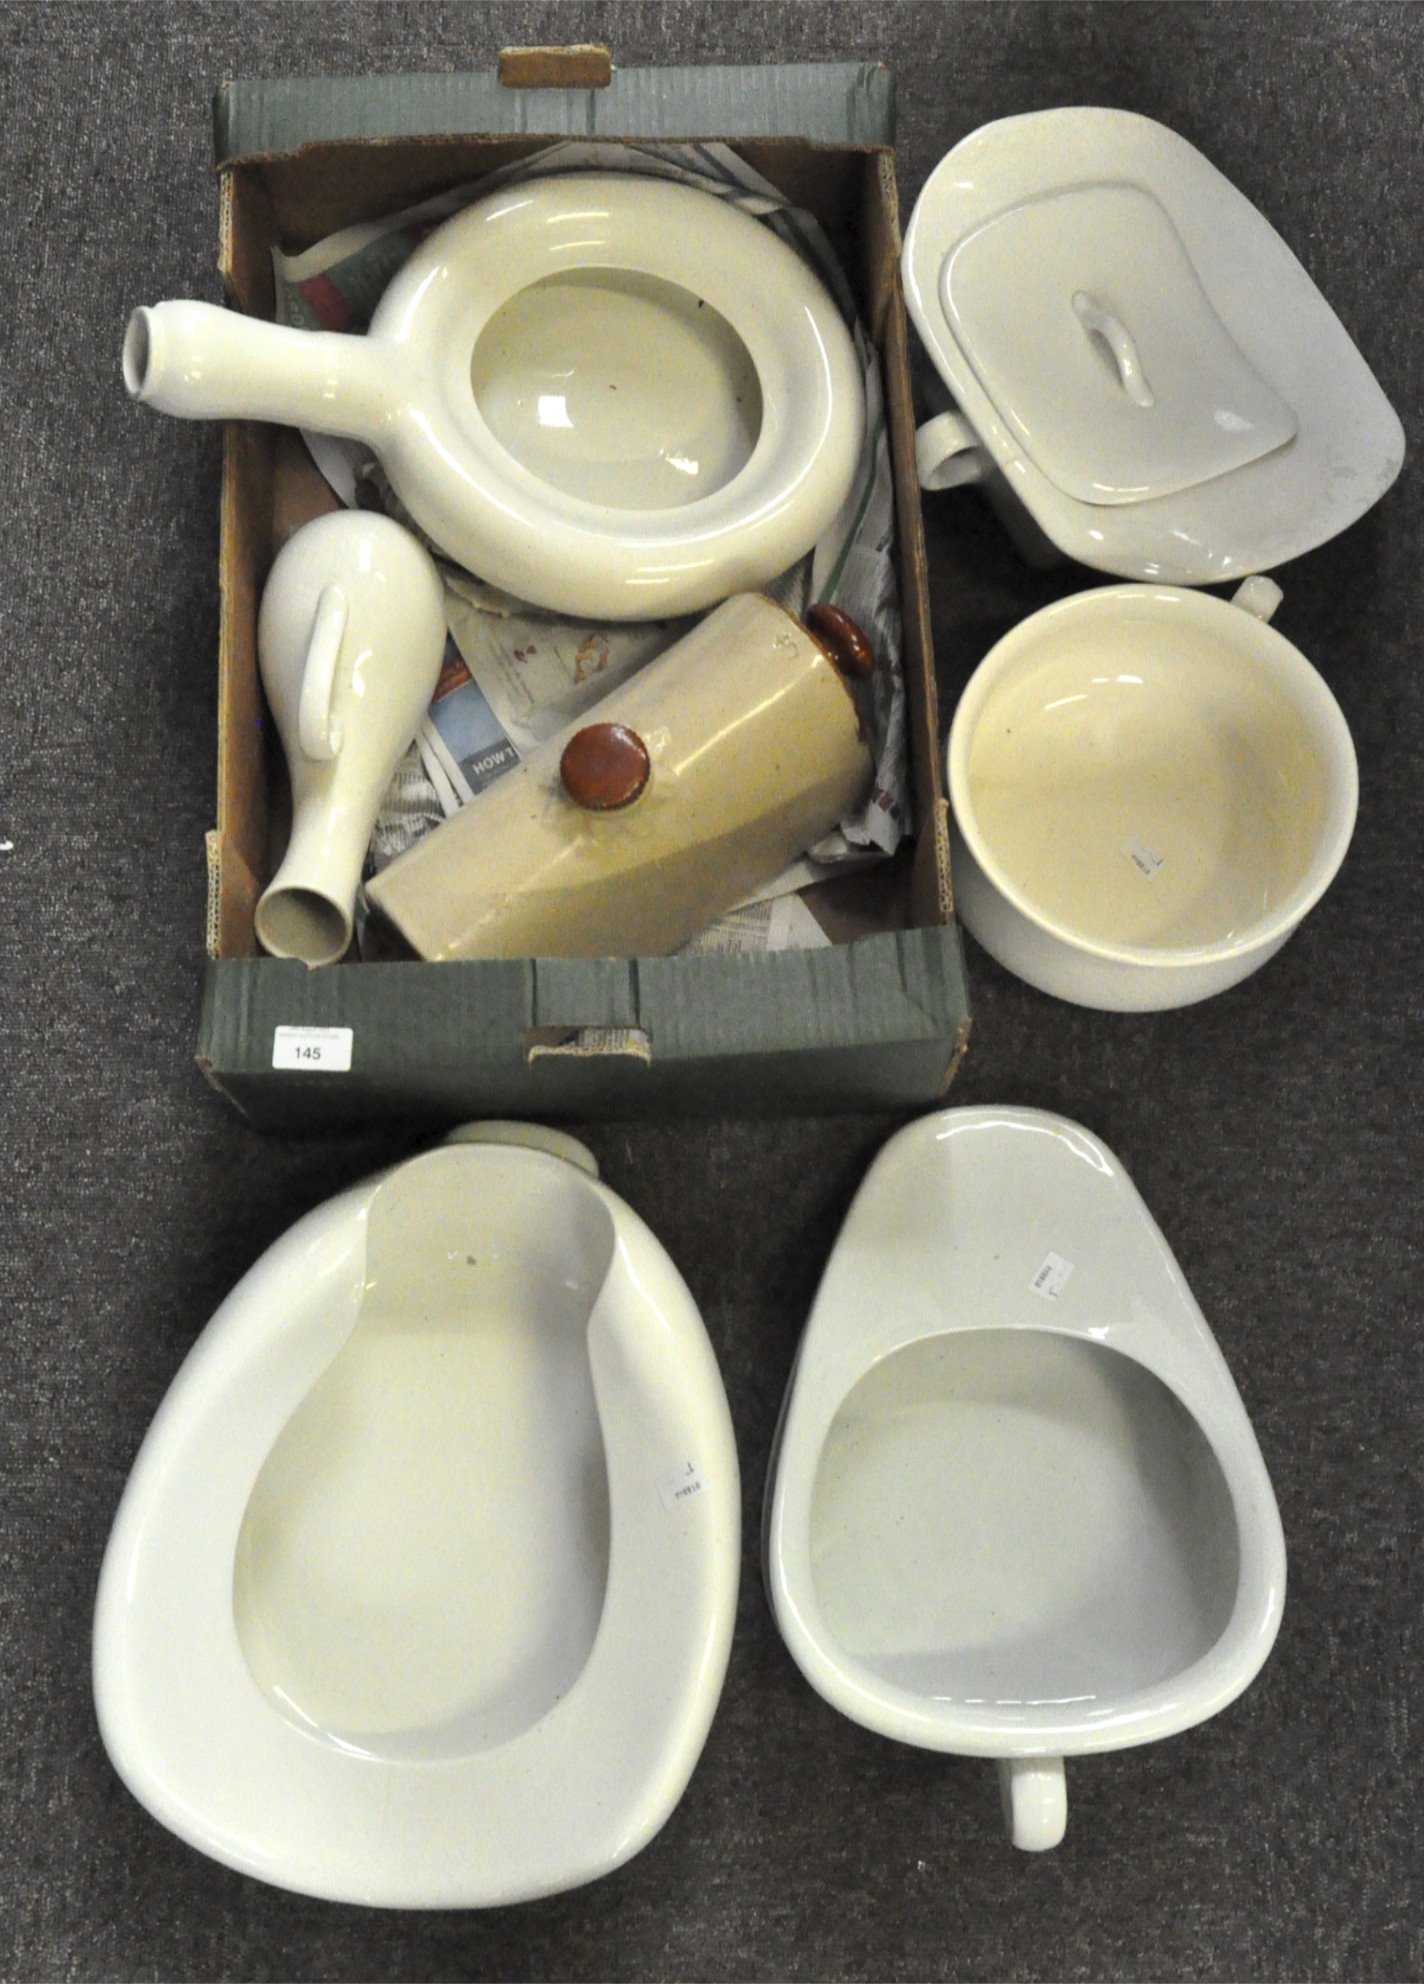 A collection of chamber pots and bed pans to include a Bristol slipper chamber pot